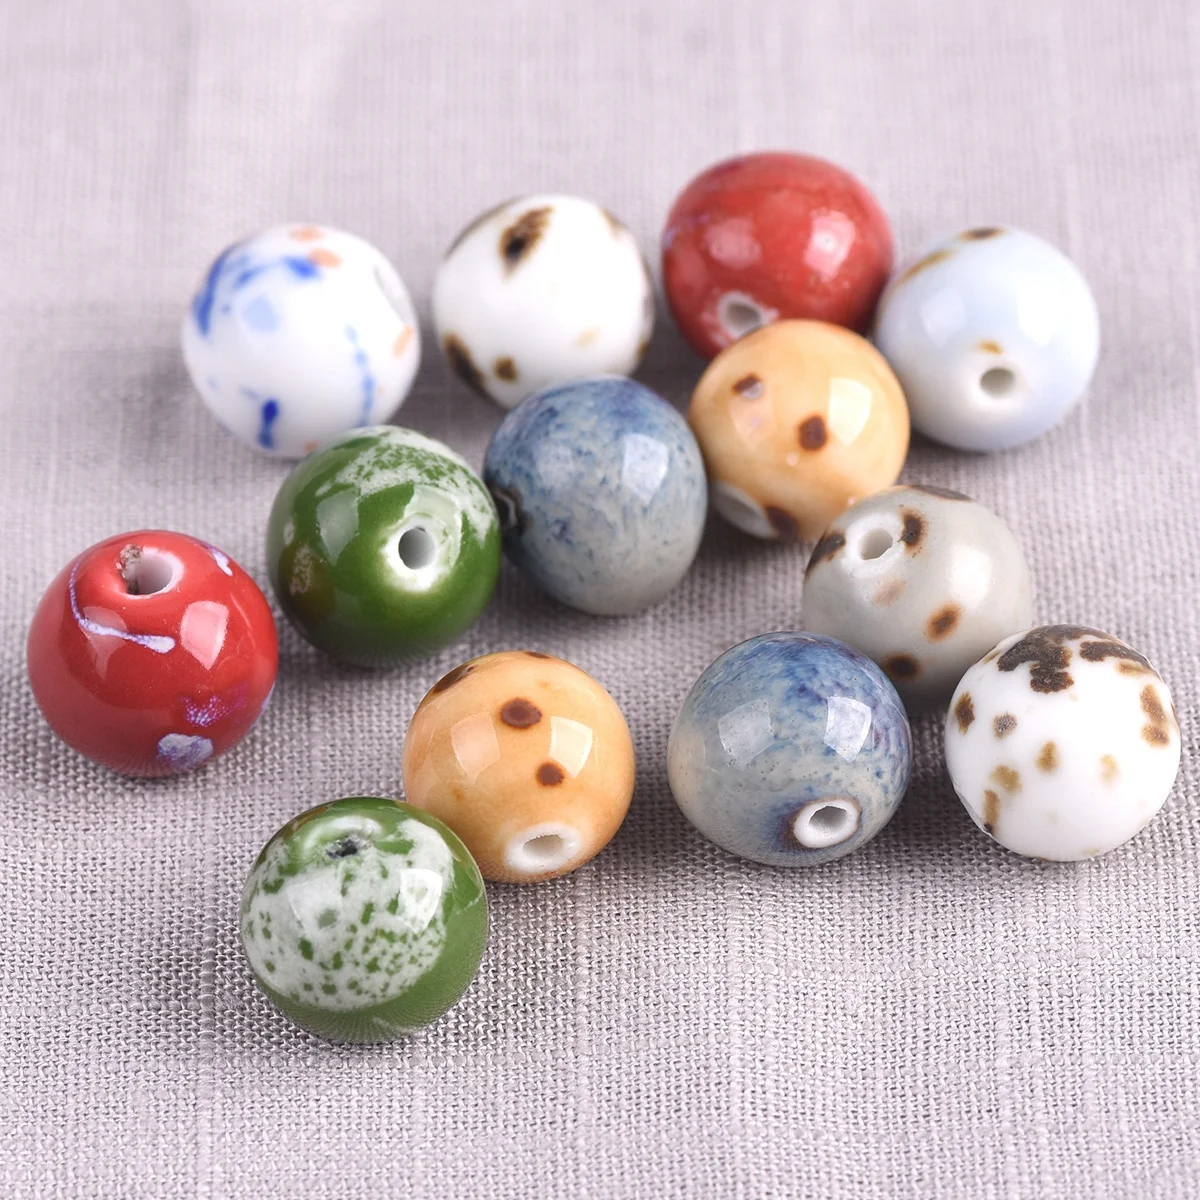 10pcs 14~15mm Random Mixed Round Ceramic Porcelain Handmade Loose Spacer Beads lot for DIY Crafts Jewelry Making 1 piece mixed ceramic ball fishing gear bearing 2os smr104c smr105c smr106c smr115c stainless steel 440c material